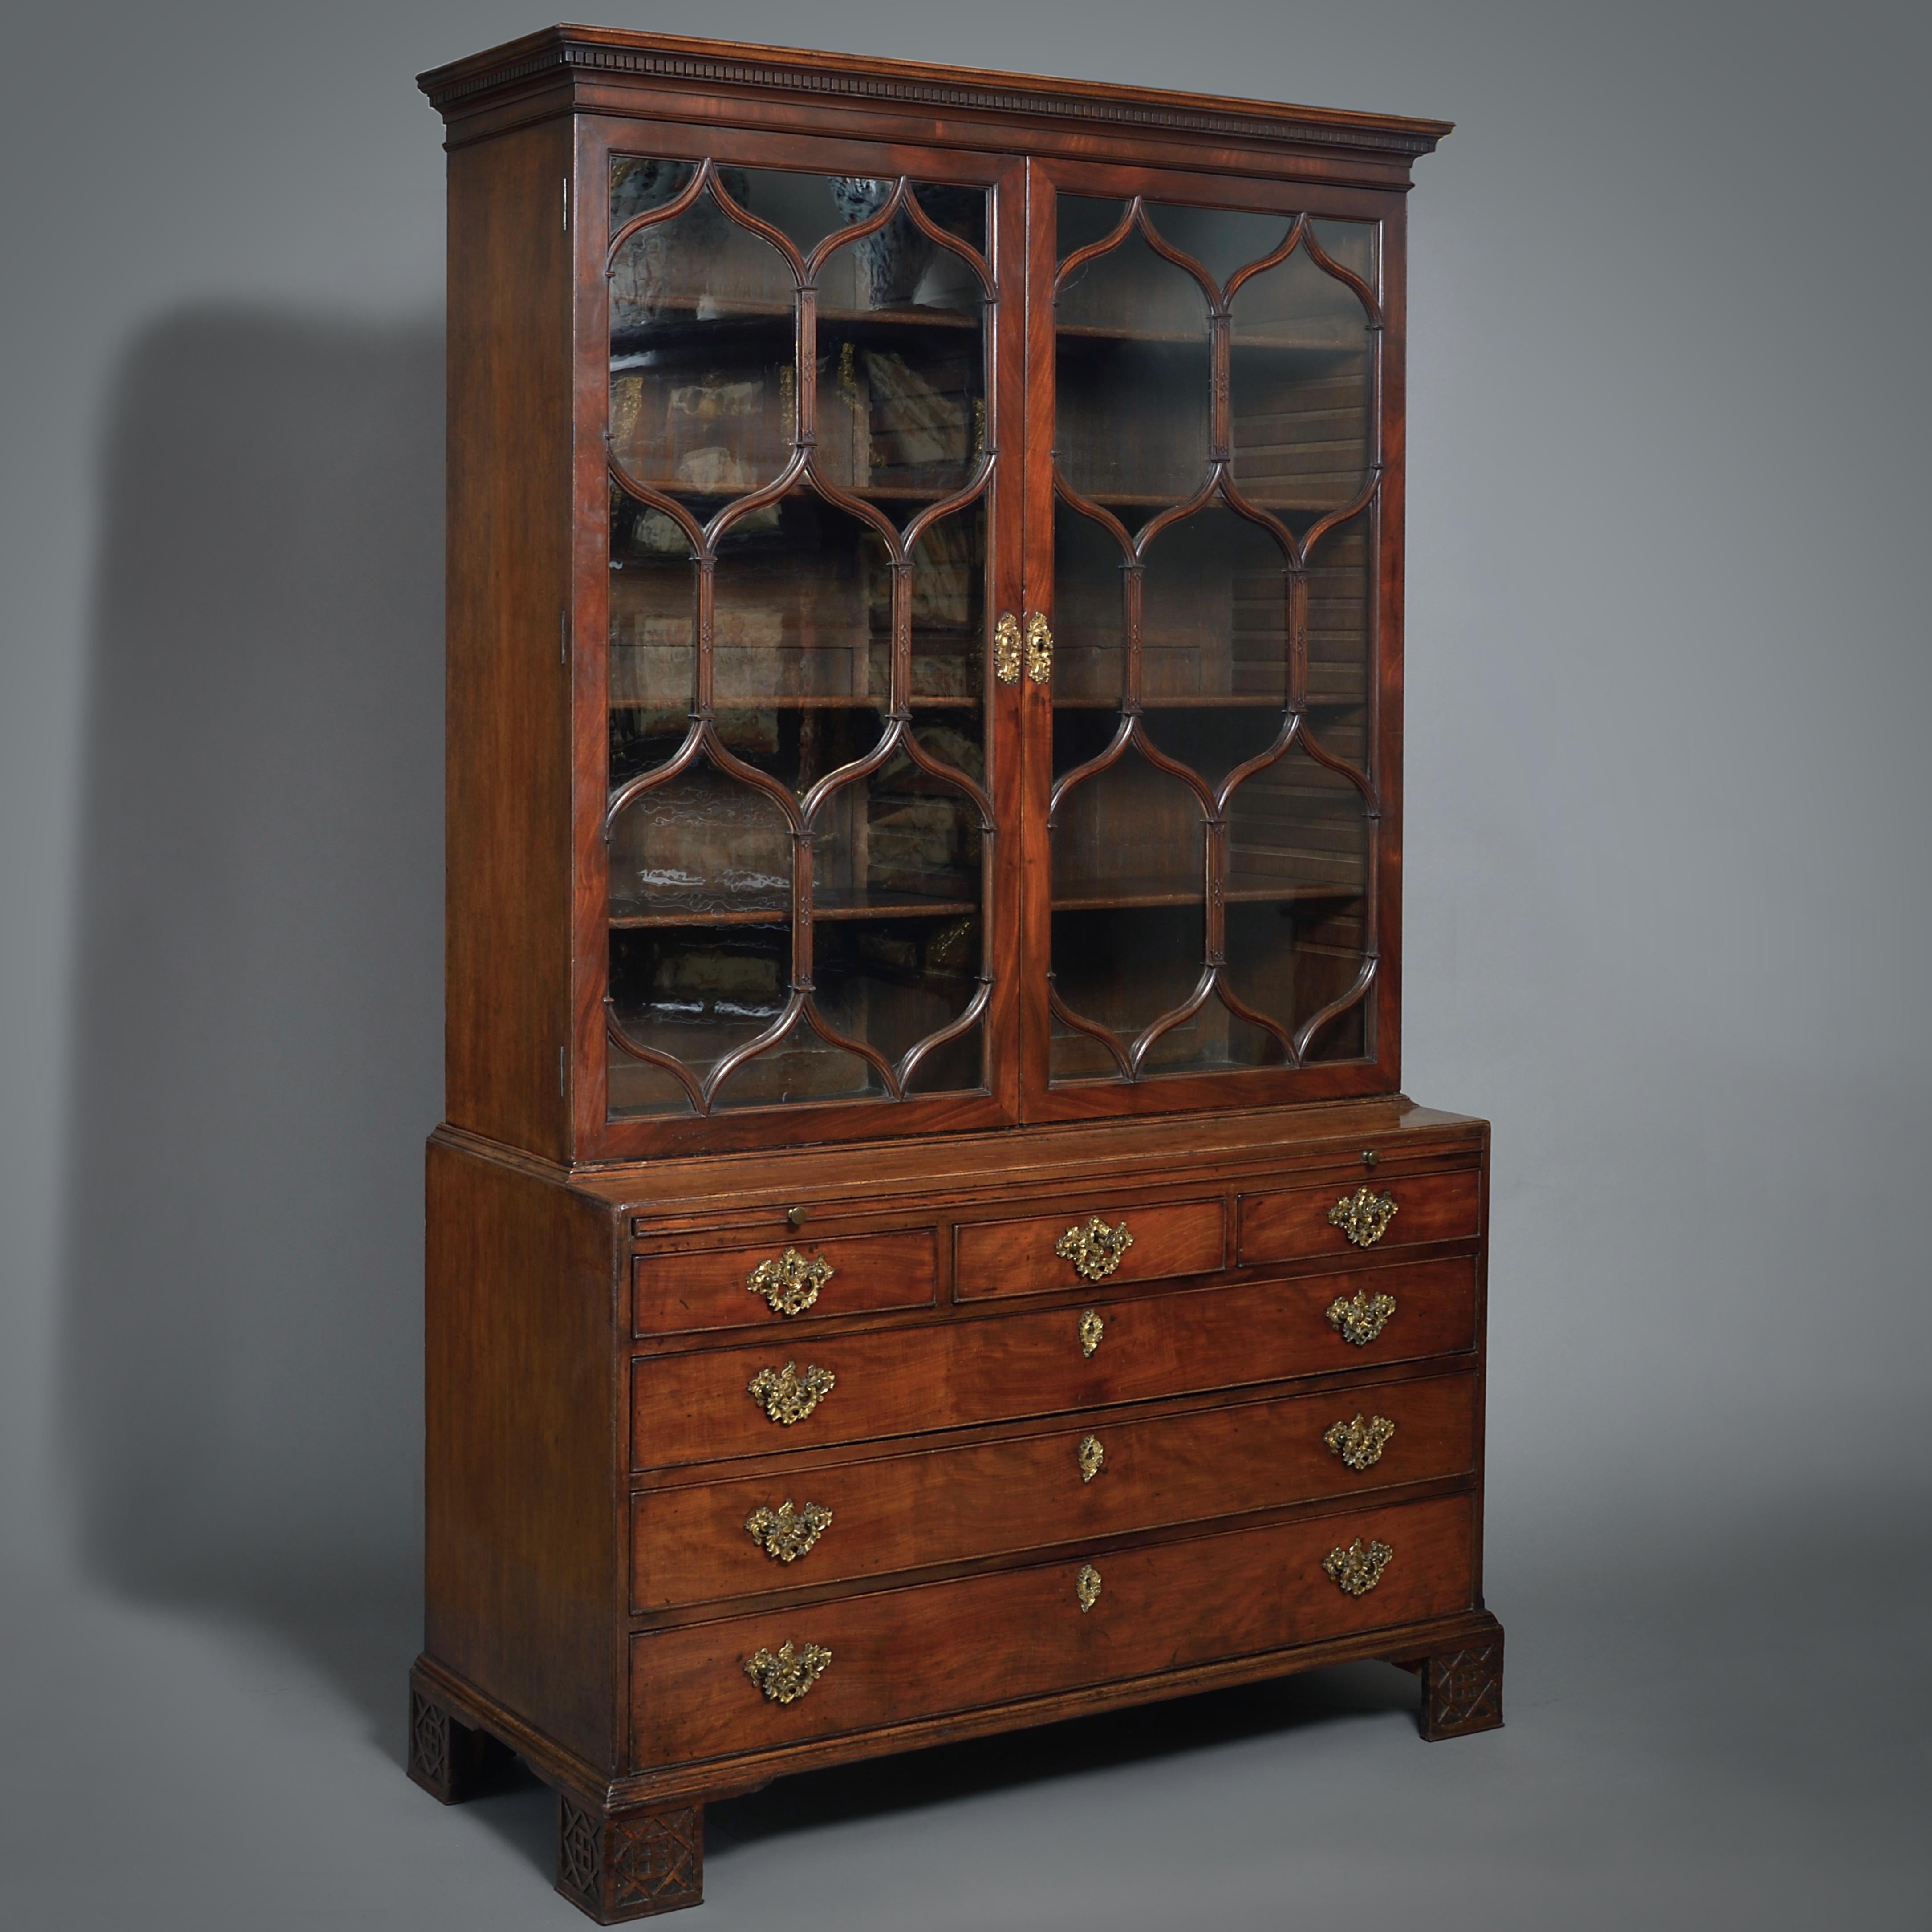 A FINE GEORGE II MAHOGANY BOOKCASE, CIRCA 1755.

Fitted throughout with it's original lacquered brass Rococo handles. The top retaining its original glass panes divided by ogee blind-fret carved glazing bars. The base with a baize-lined brushing